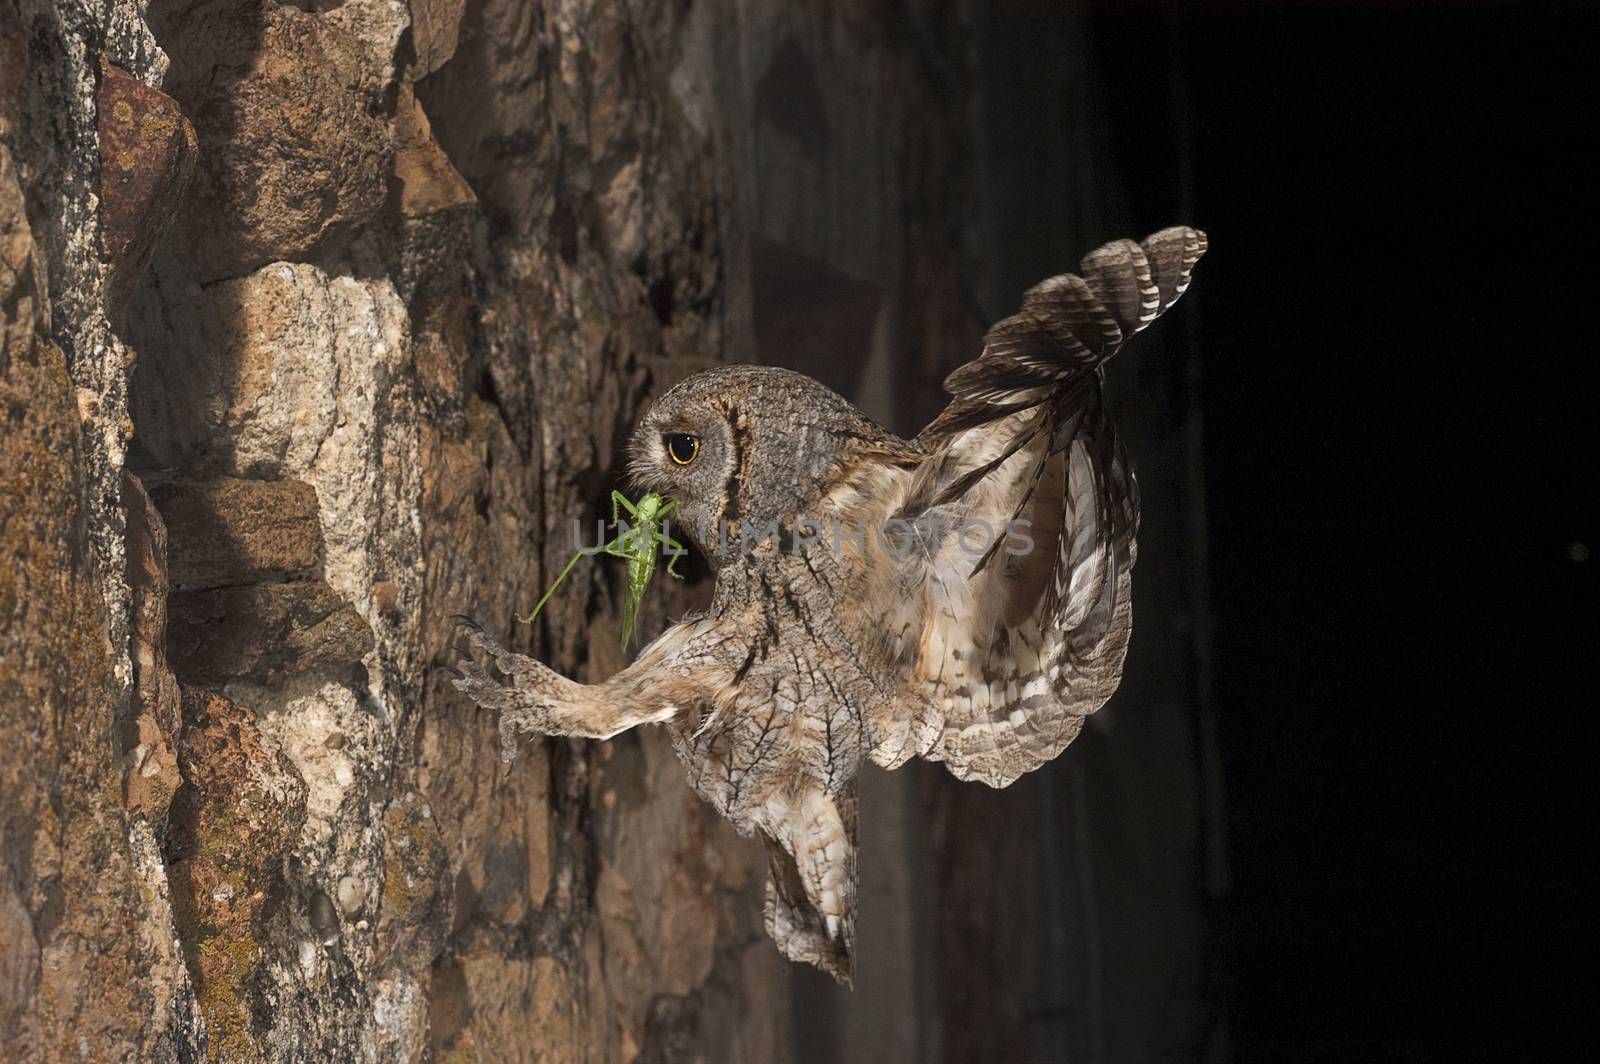 Eurasian Scops Owl, small owl, flying and hunting, with an insec by jalonsohu@gmail.com